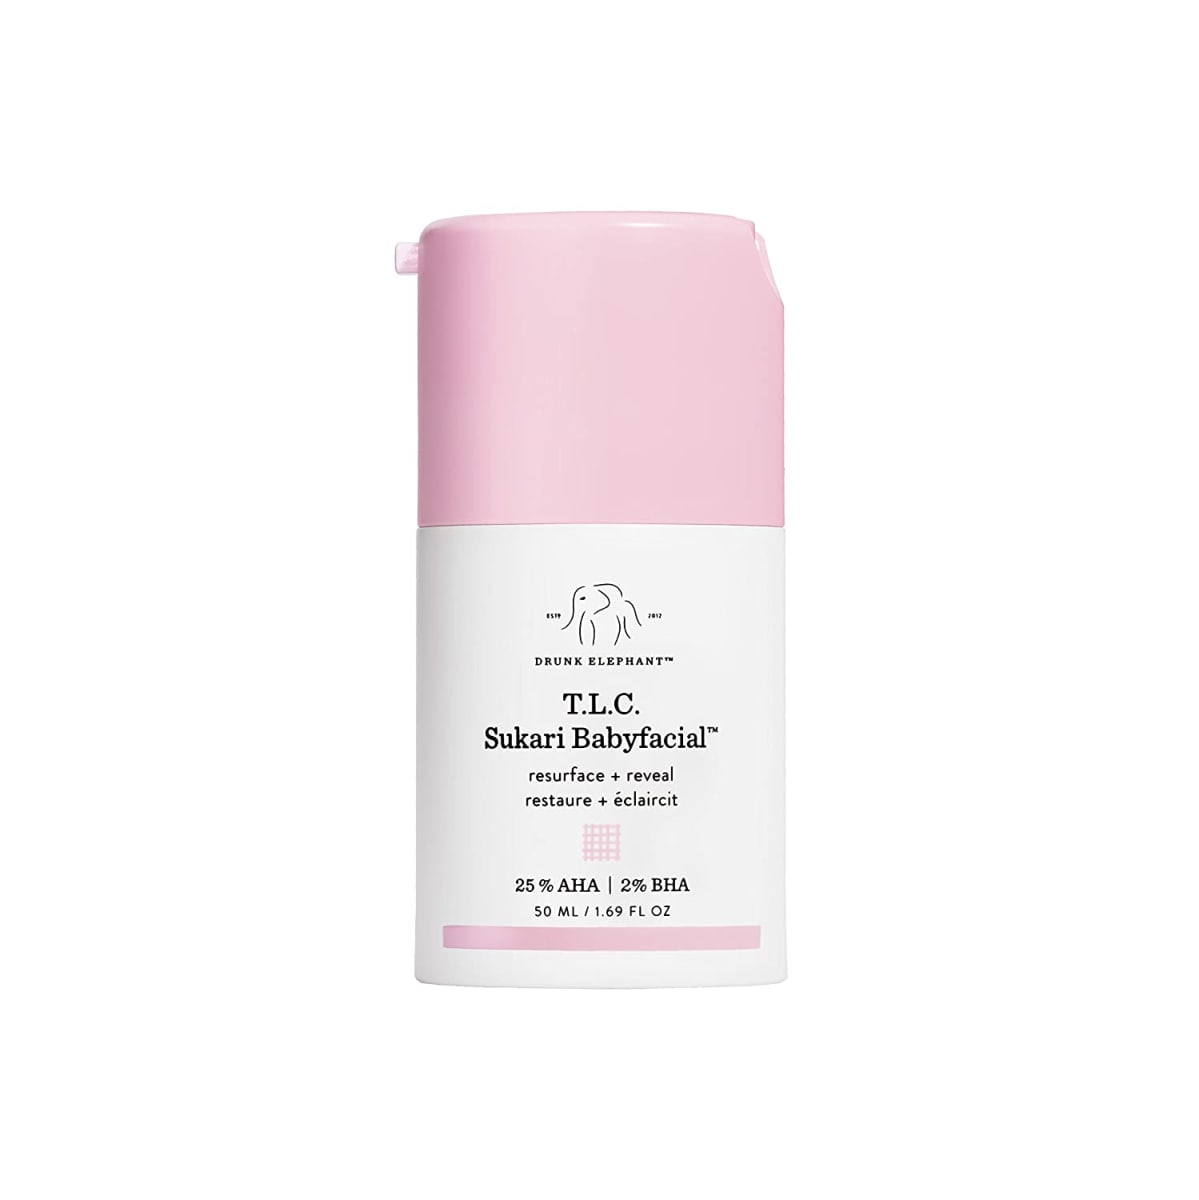 Drunk Elephant T.L.C. Sukari Babyfacial. AHA/BHA Face Mask for Great Skin Clarity, Texture and Tone for a Youthful Radiance. (1.69 Fl Oz).